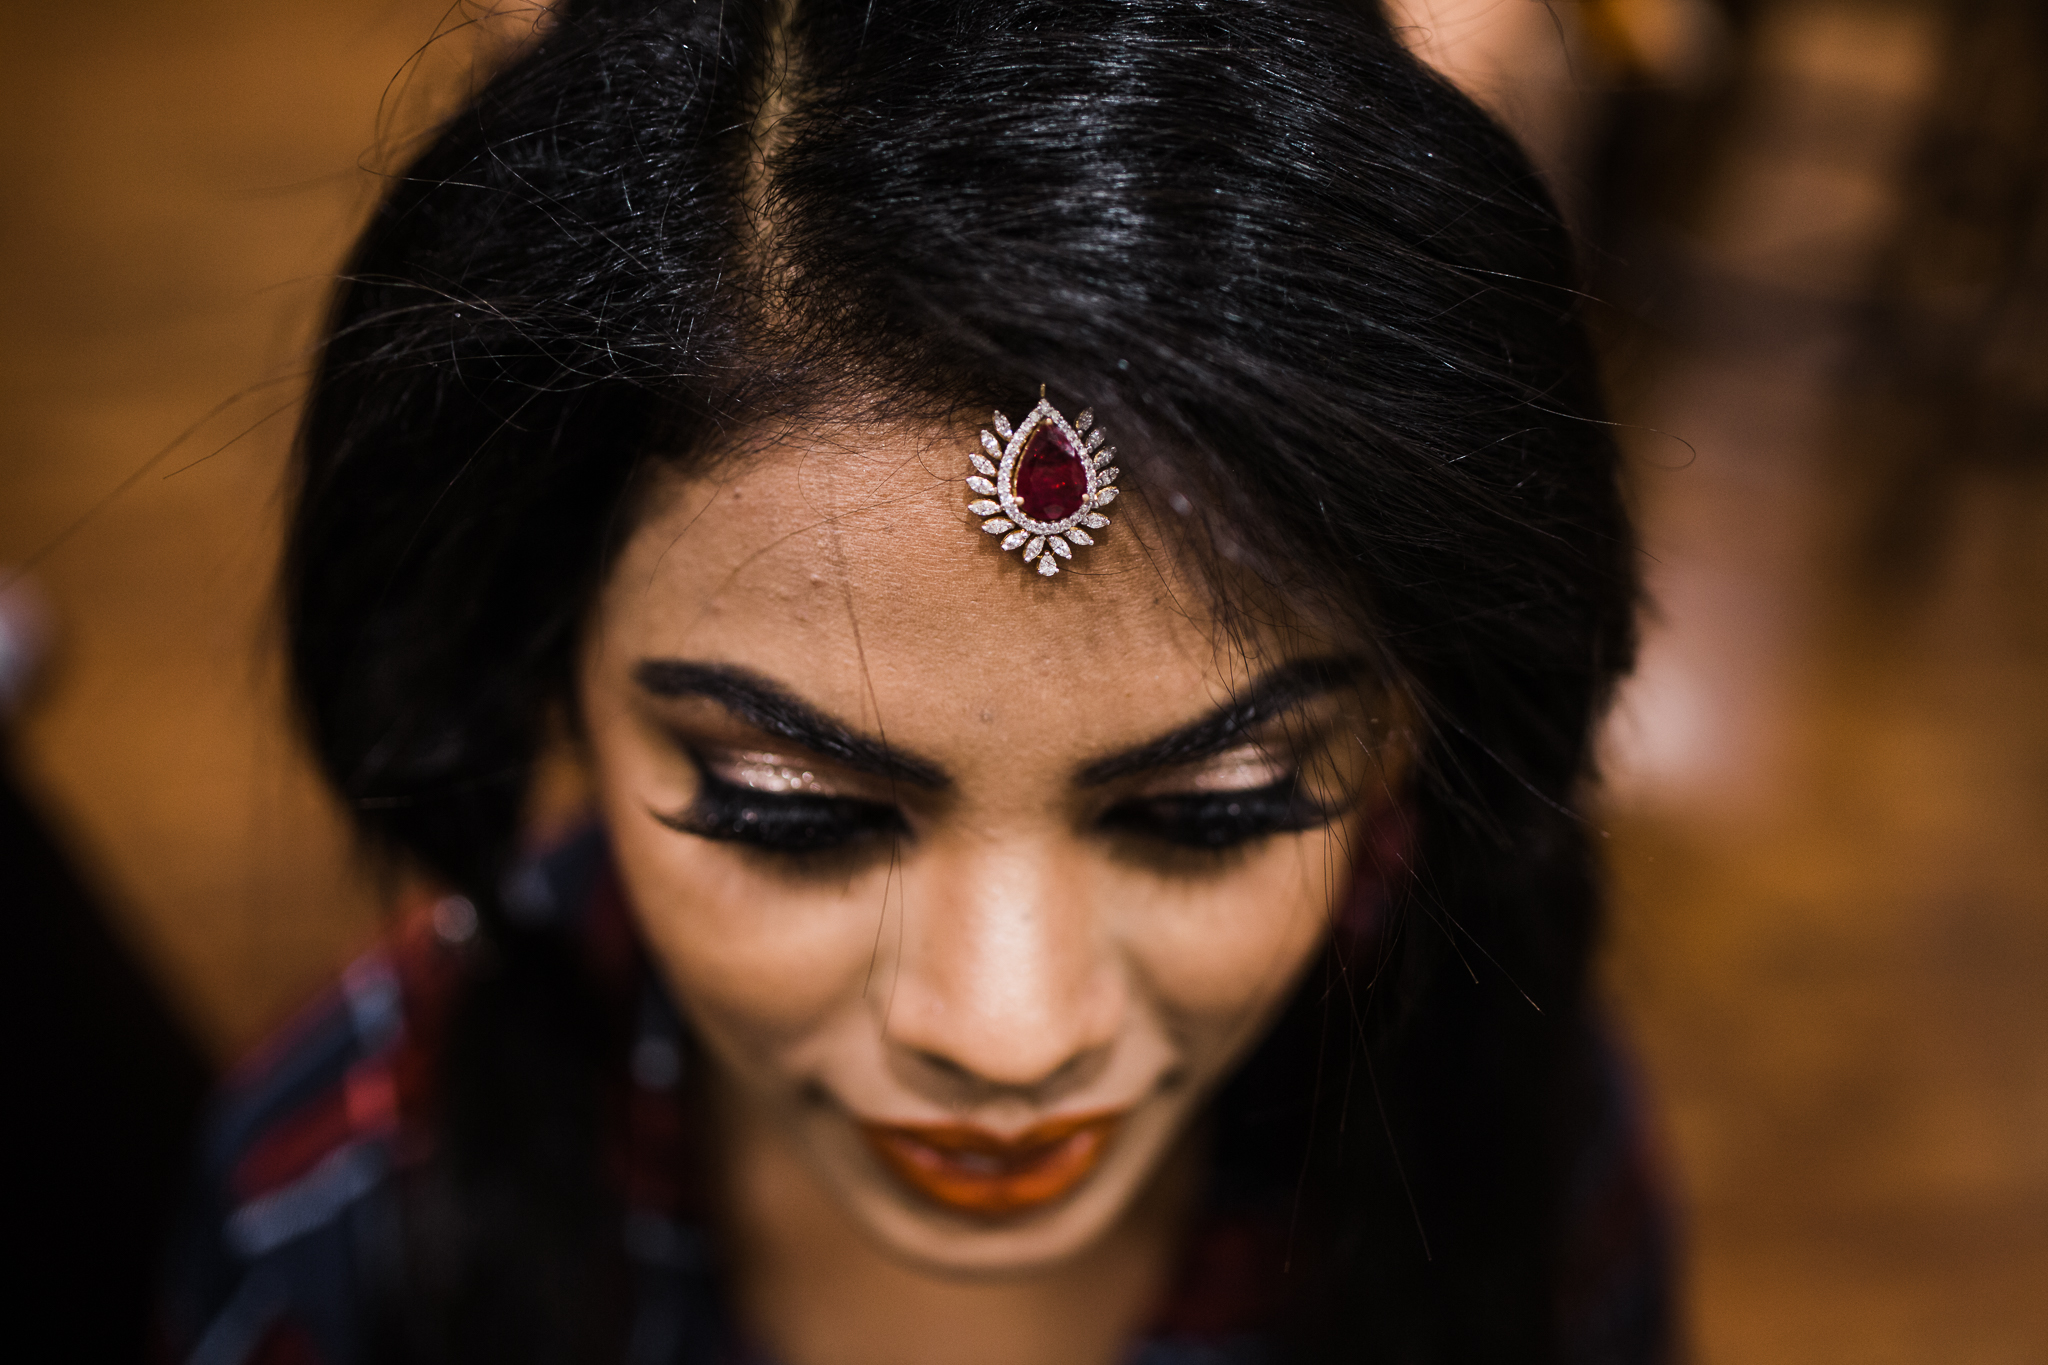 Keerthi and Kishore - Indian Wedding - elizalde photography - Dallas Photographer - South Asian Wedding Photographer - The SPRINGS Event Venue (16 of 226).jpg